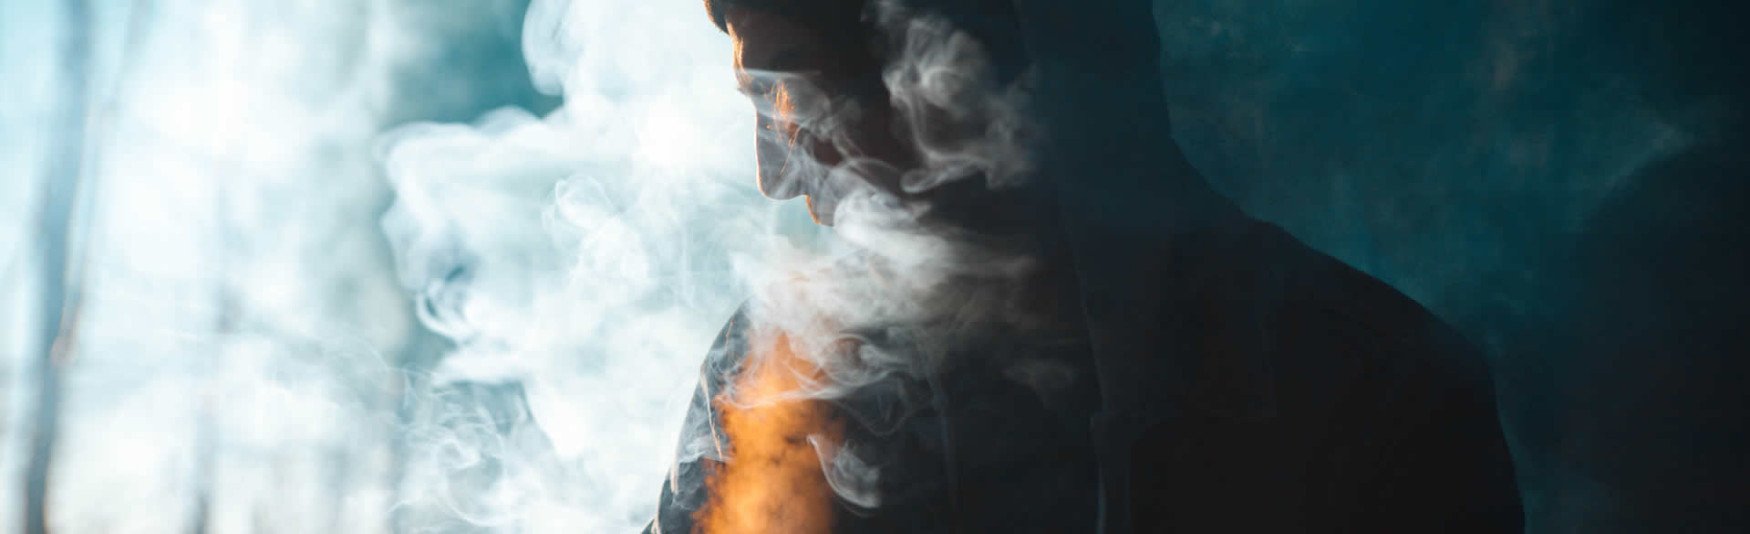 unhealthy person surrounded by cigarette smoke